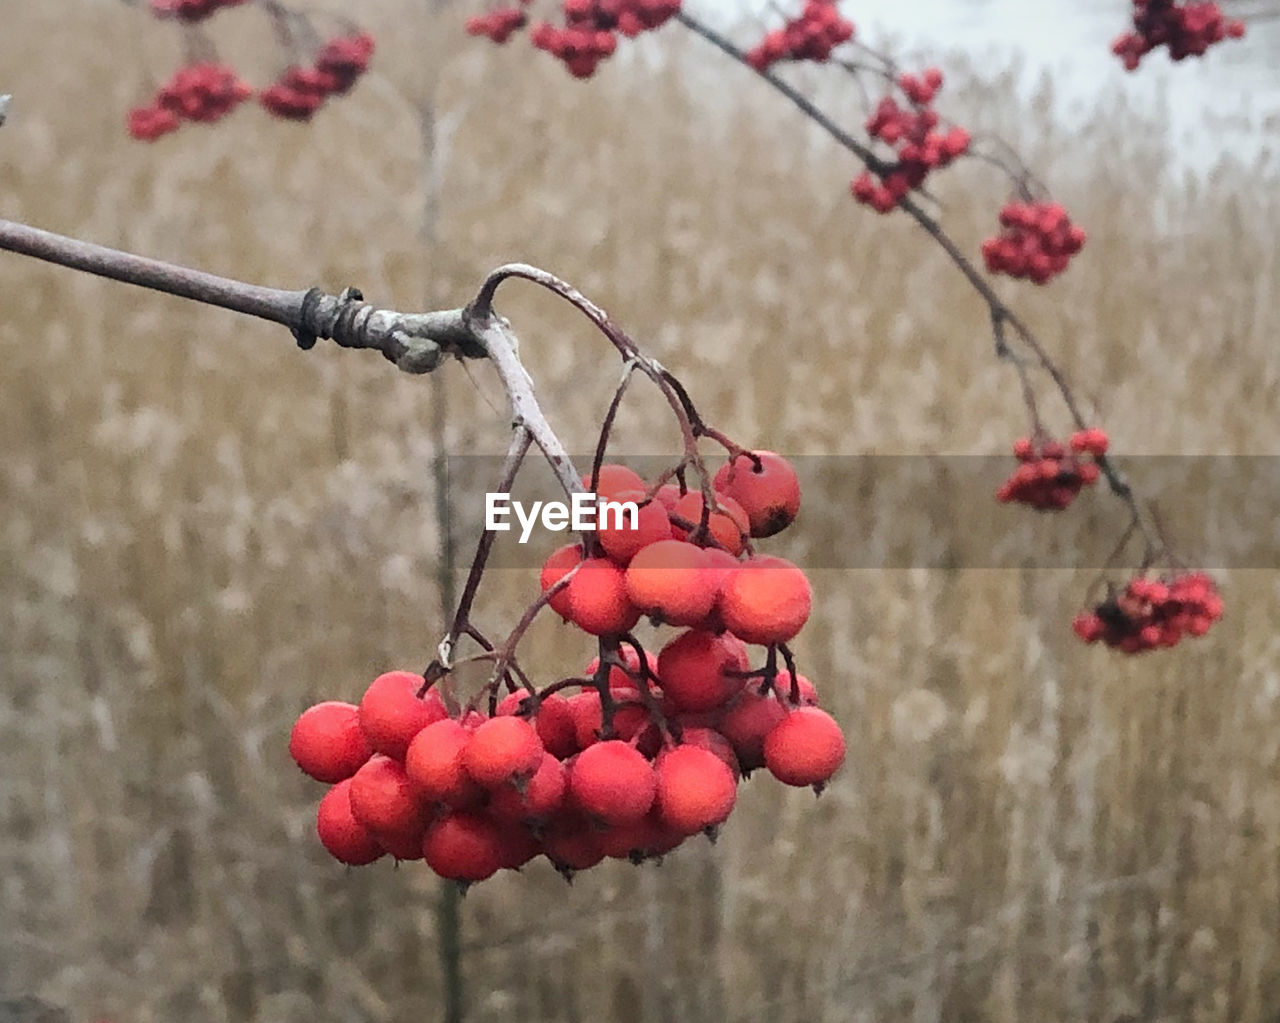 CLOSE-UP OF RED BERRIES ON BRANCH